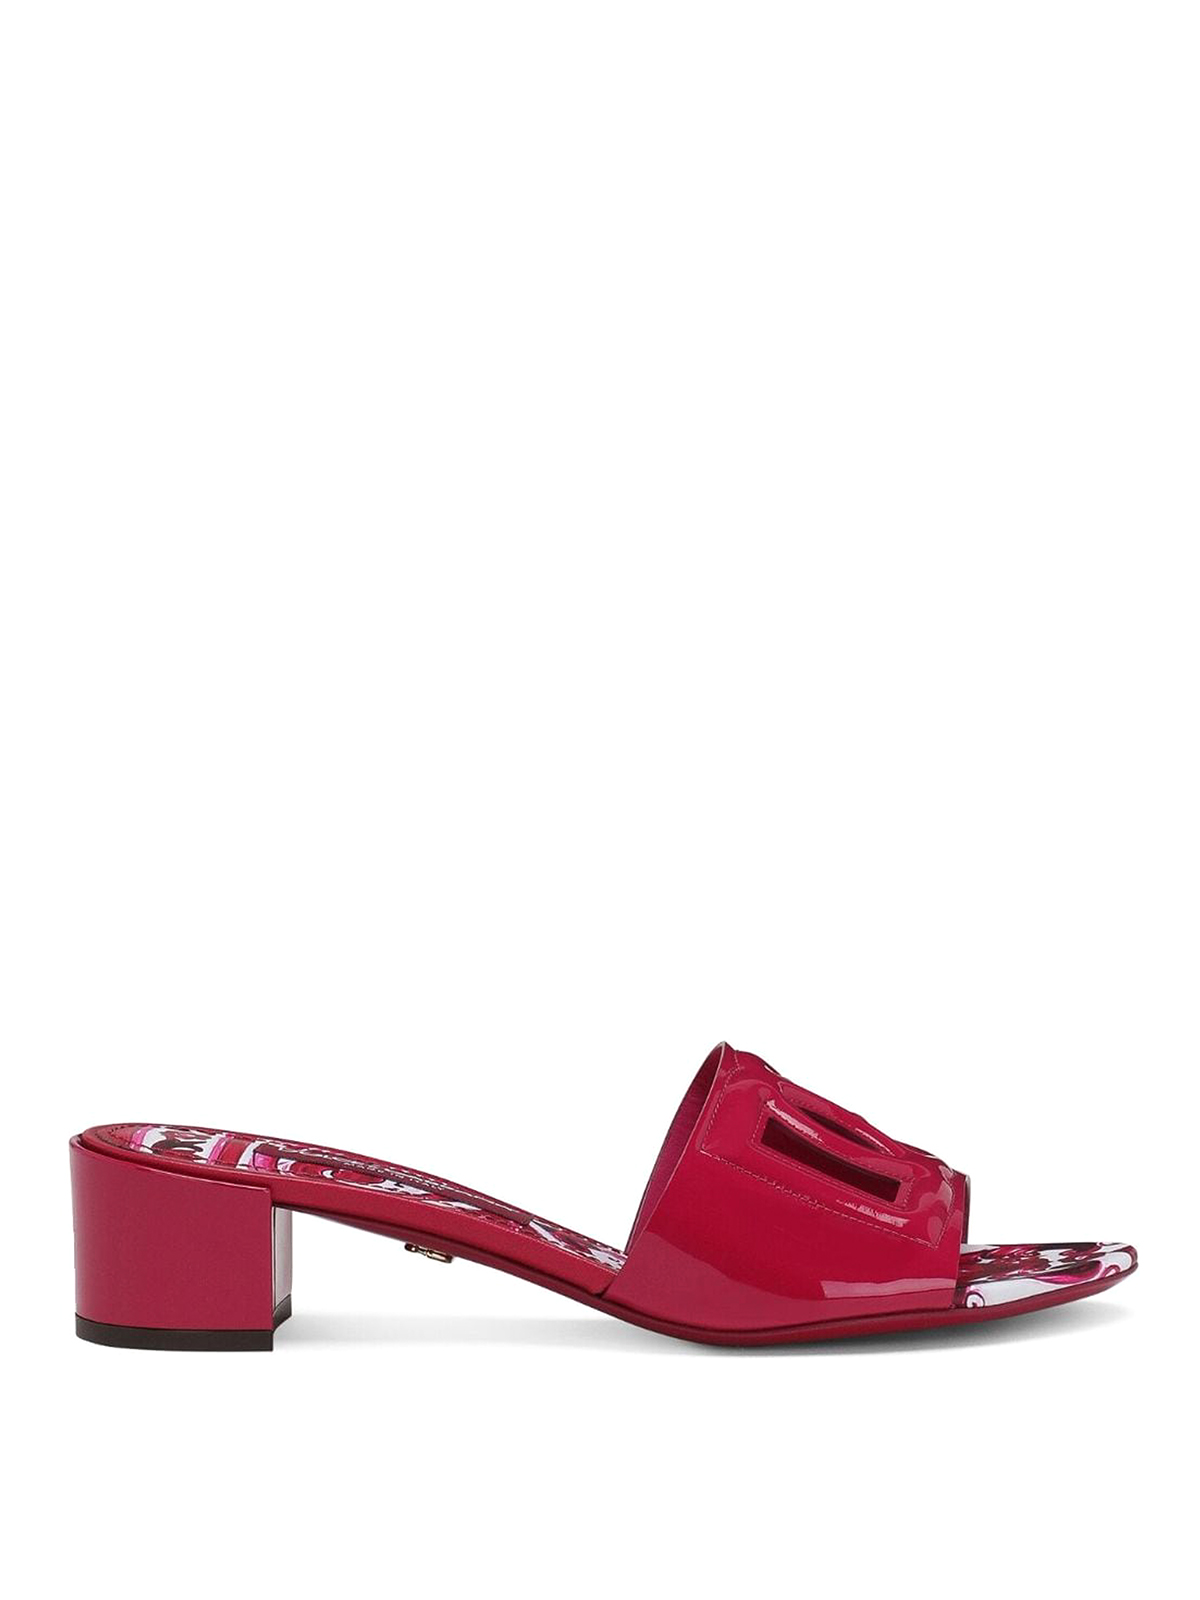 Dolce & Gabbana Dg Patent Leather Mules In Red